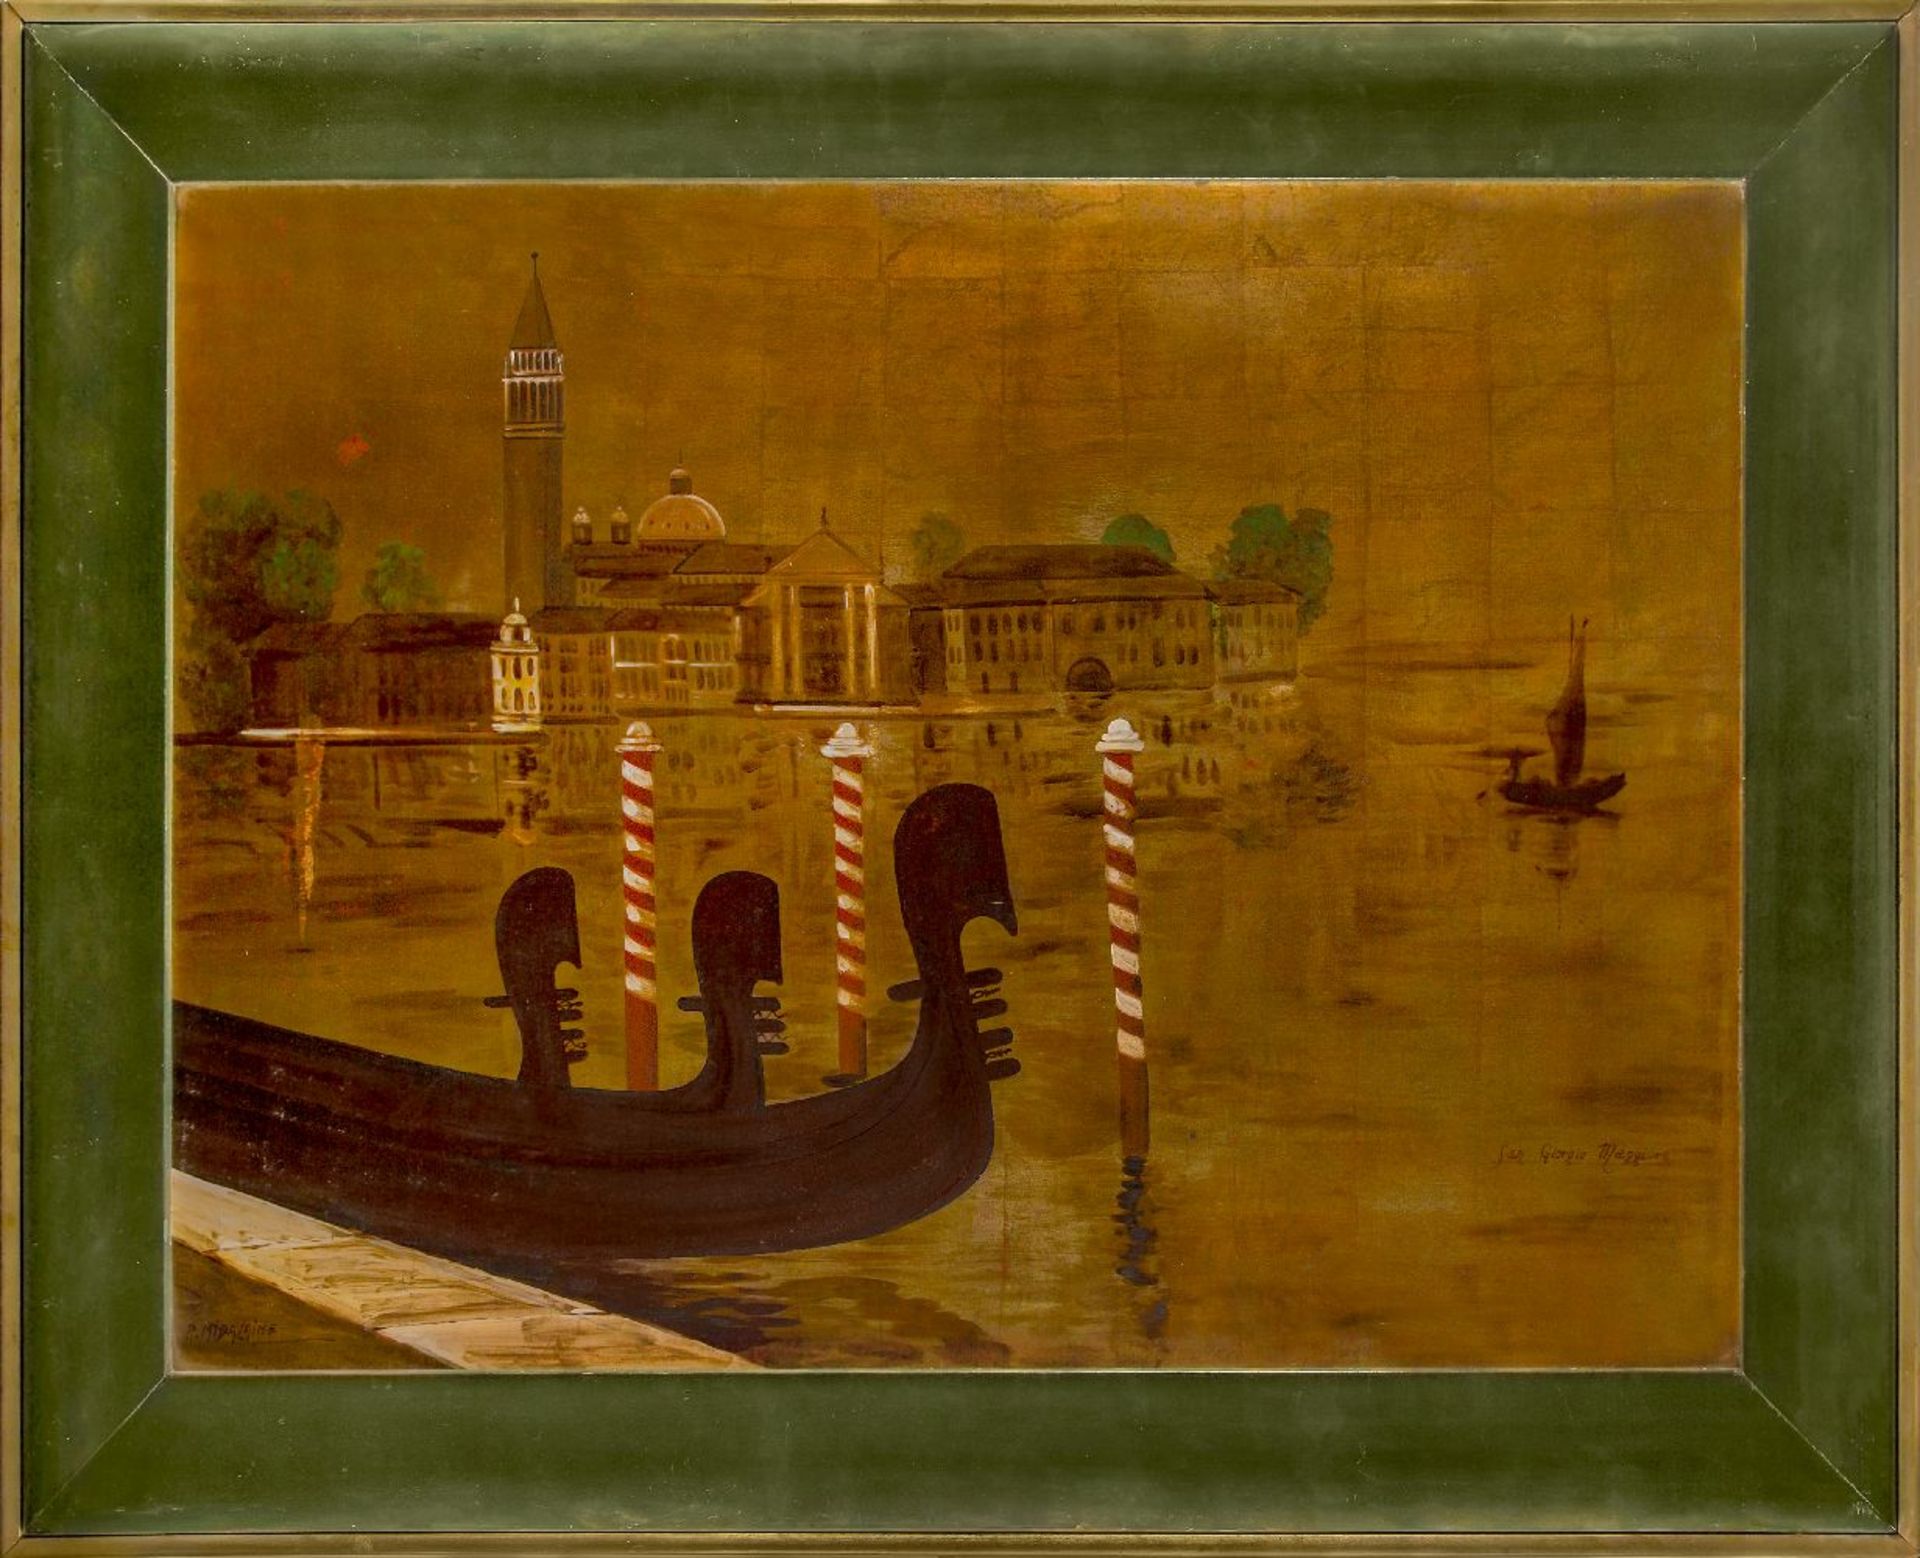 Roger Midavaine (1922-2000), lacquer on board with polychrome painted details, c.1950/60, signed and